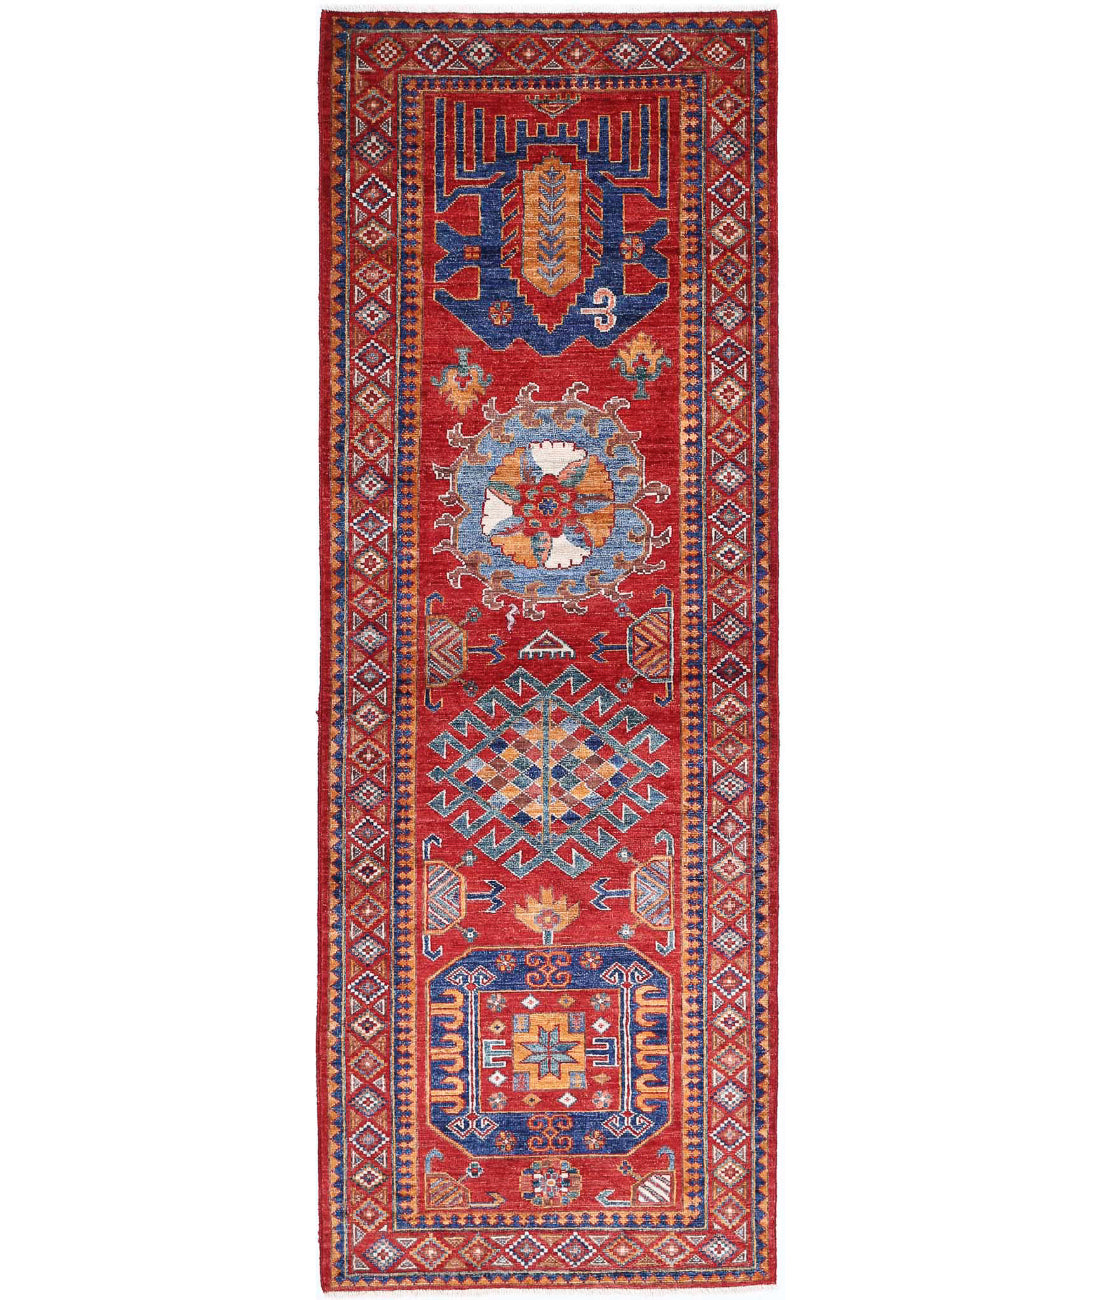 Hand Knotted Nomadic Caucasian Humna Wool Rug - 2&#39;9&#39;&#39; x 7&#39;11&#39;&#39; 2&#39;9&#39;&#39; x 7&#39;11&#39;&#39; (83 X 238) / Red / Gold